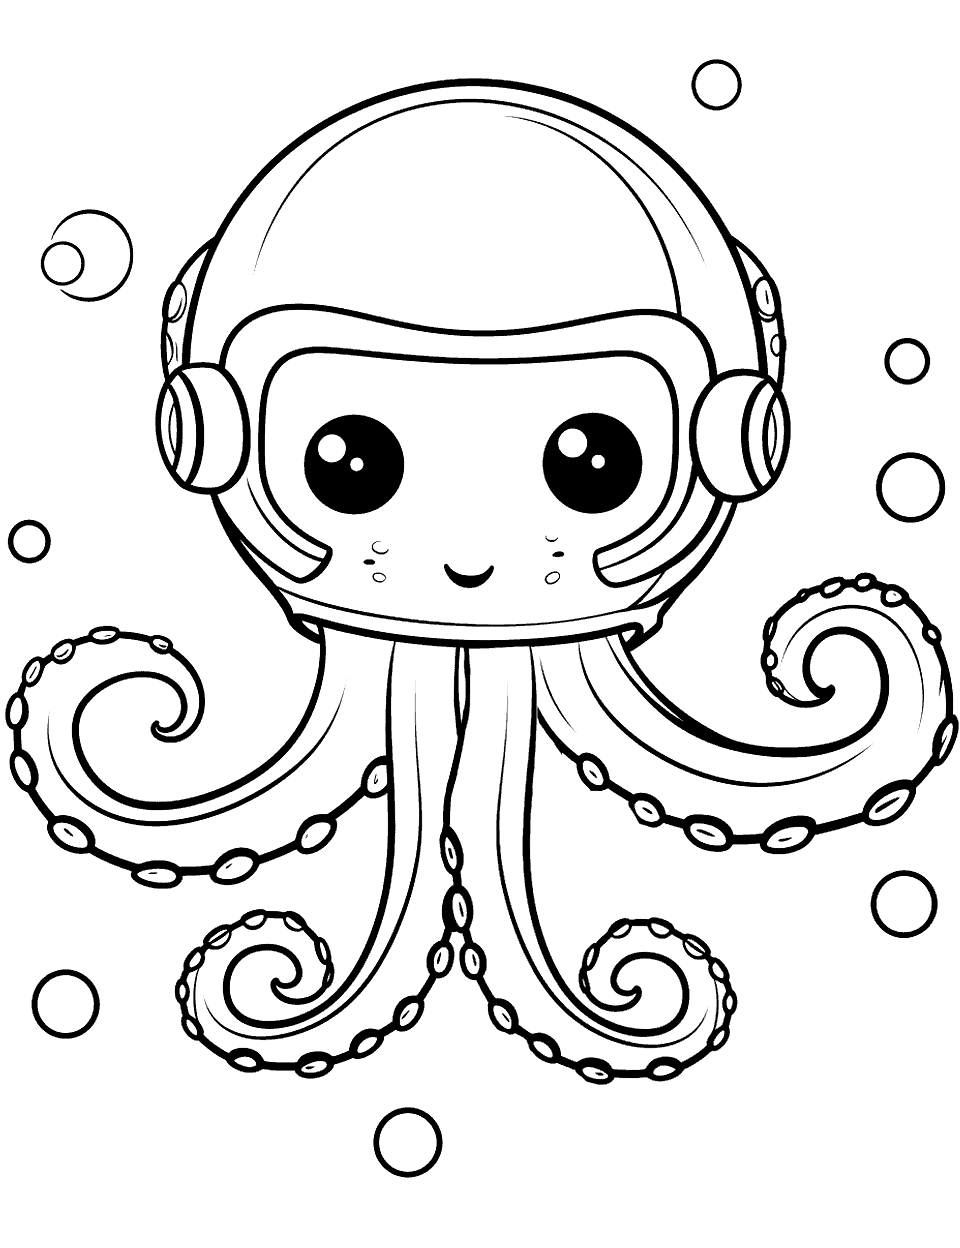 Octopus Astronaut in Space Coloring Page - An adventurous octopus in an astronaut helmet floating in space.